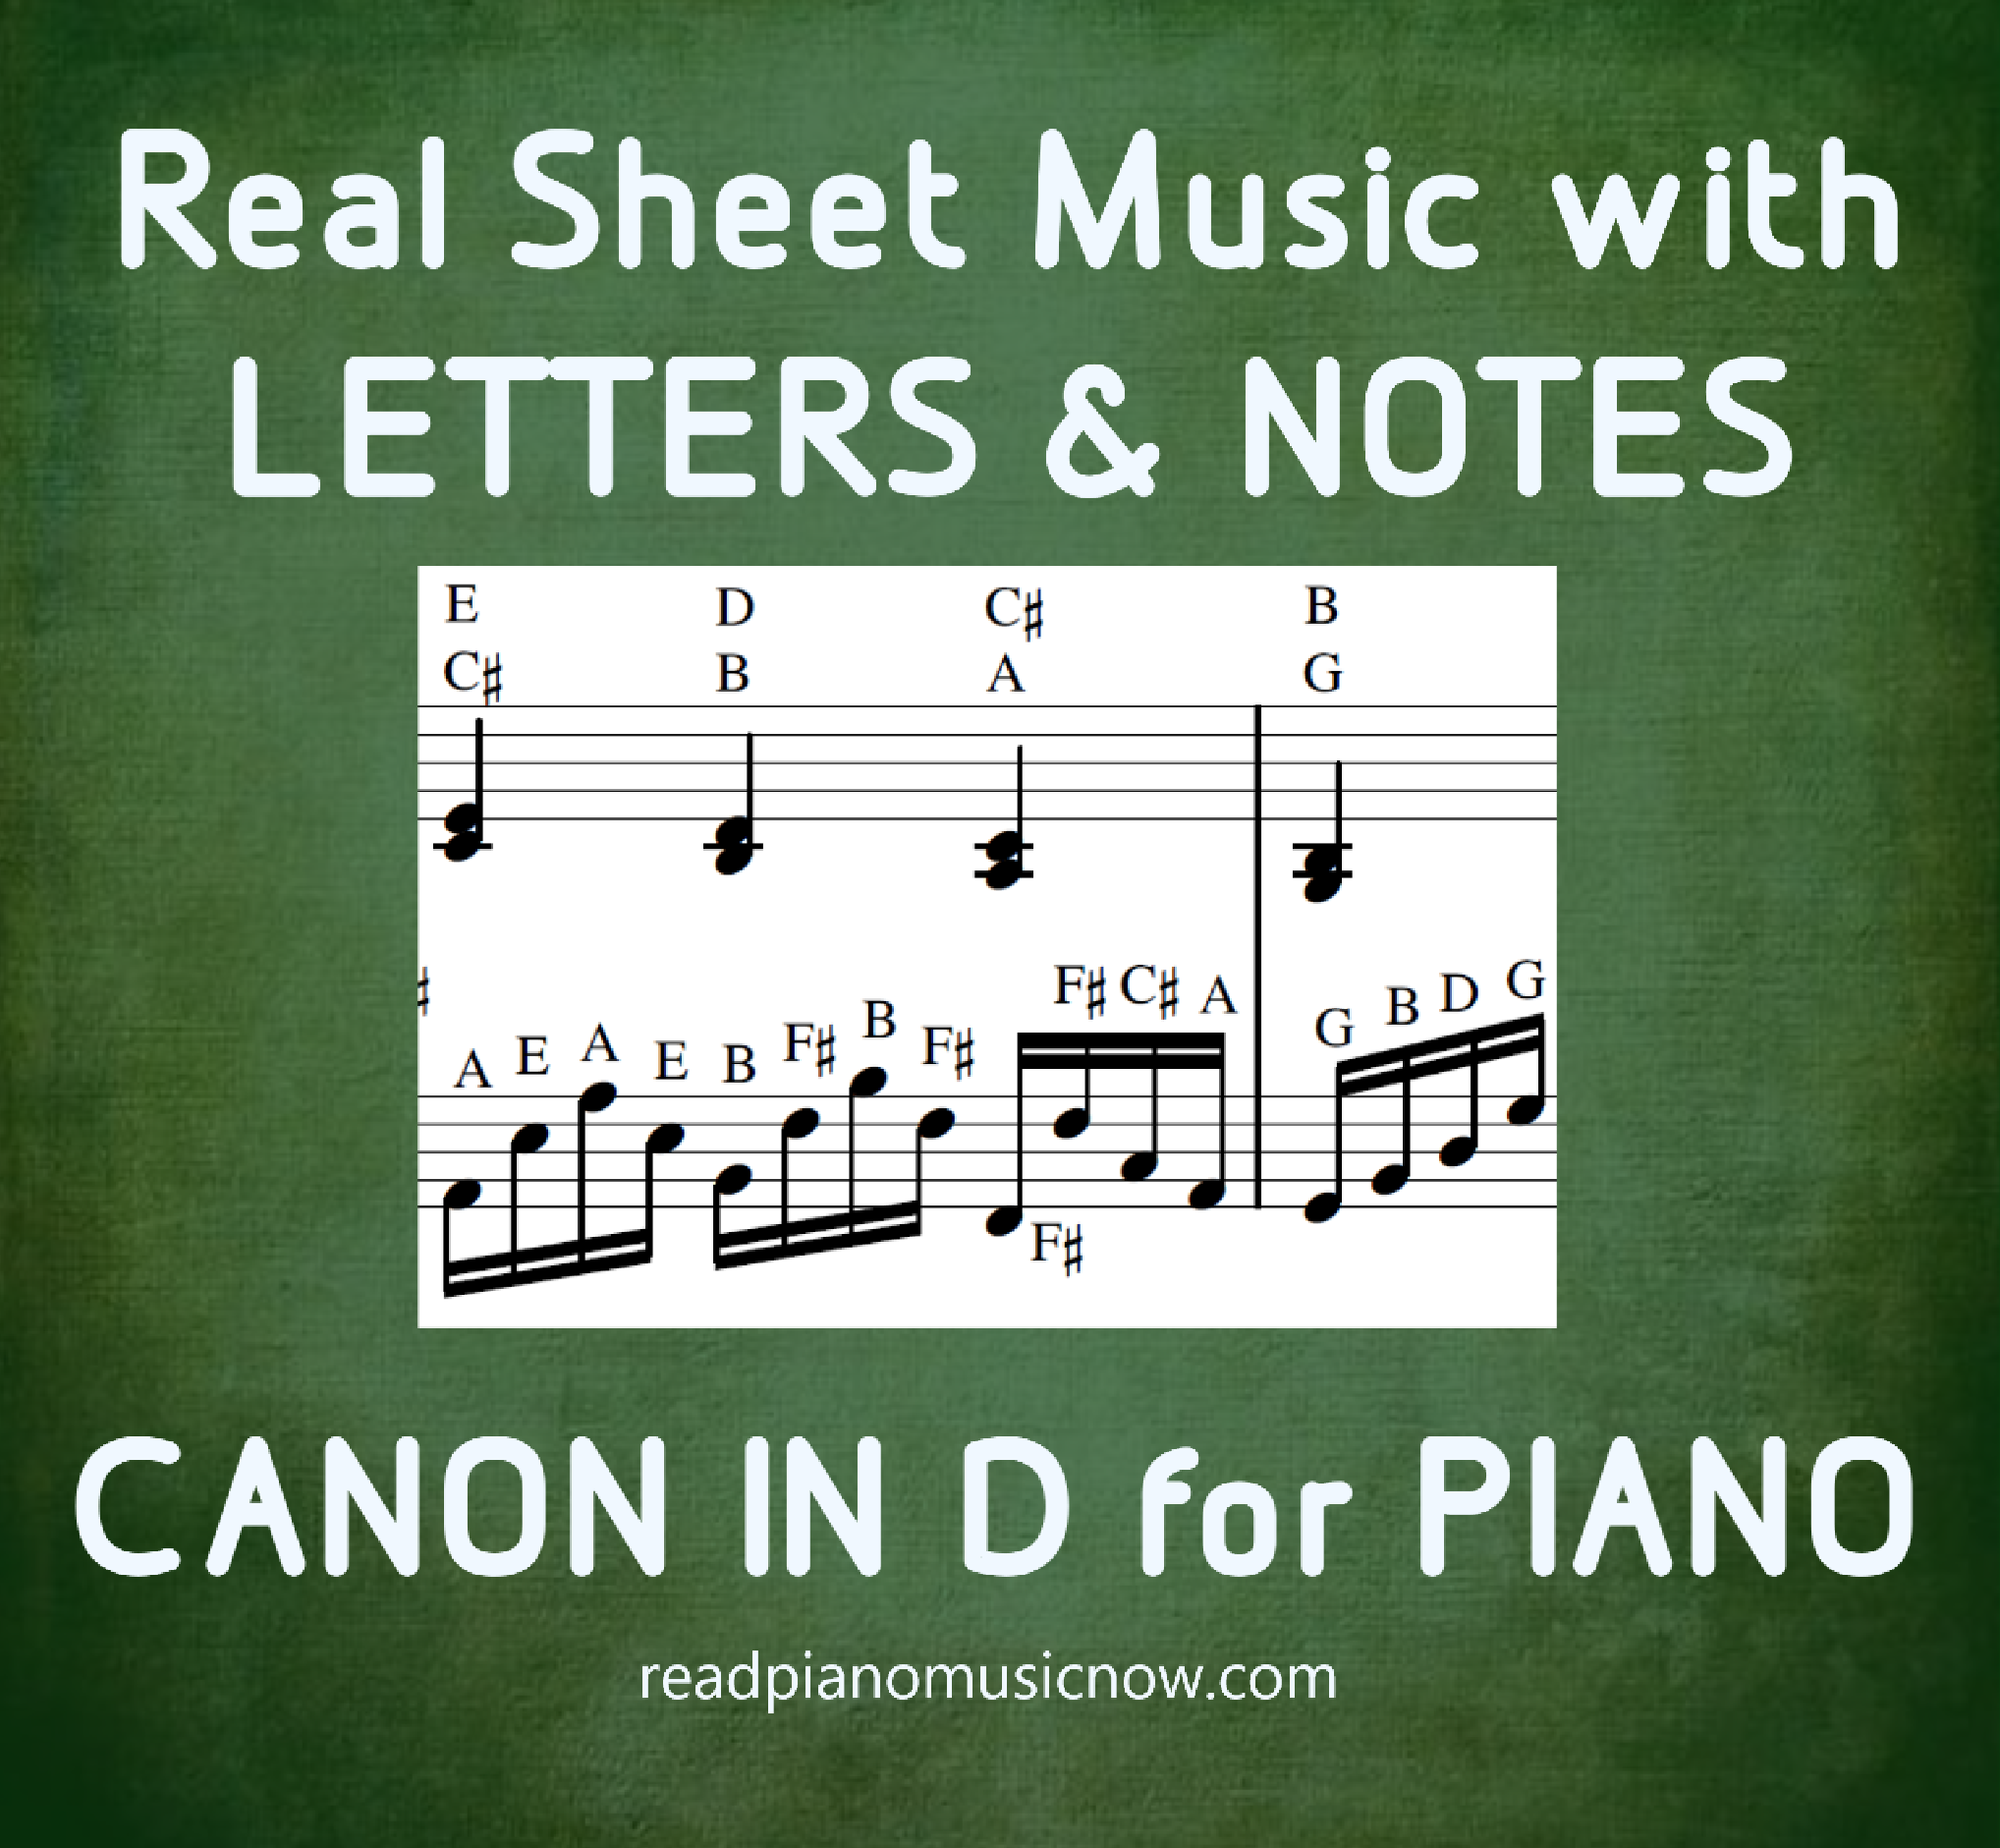 Image of 'Canon in D' sheet music with letters